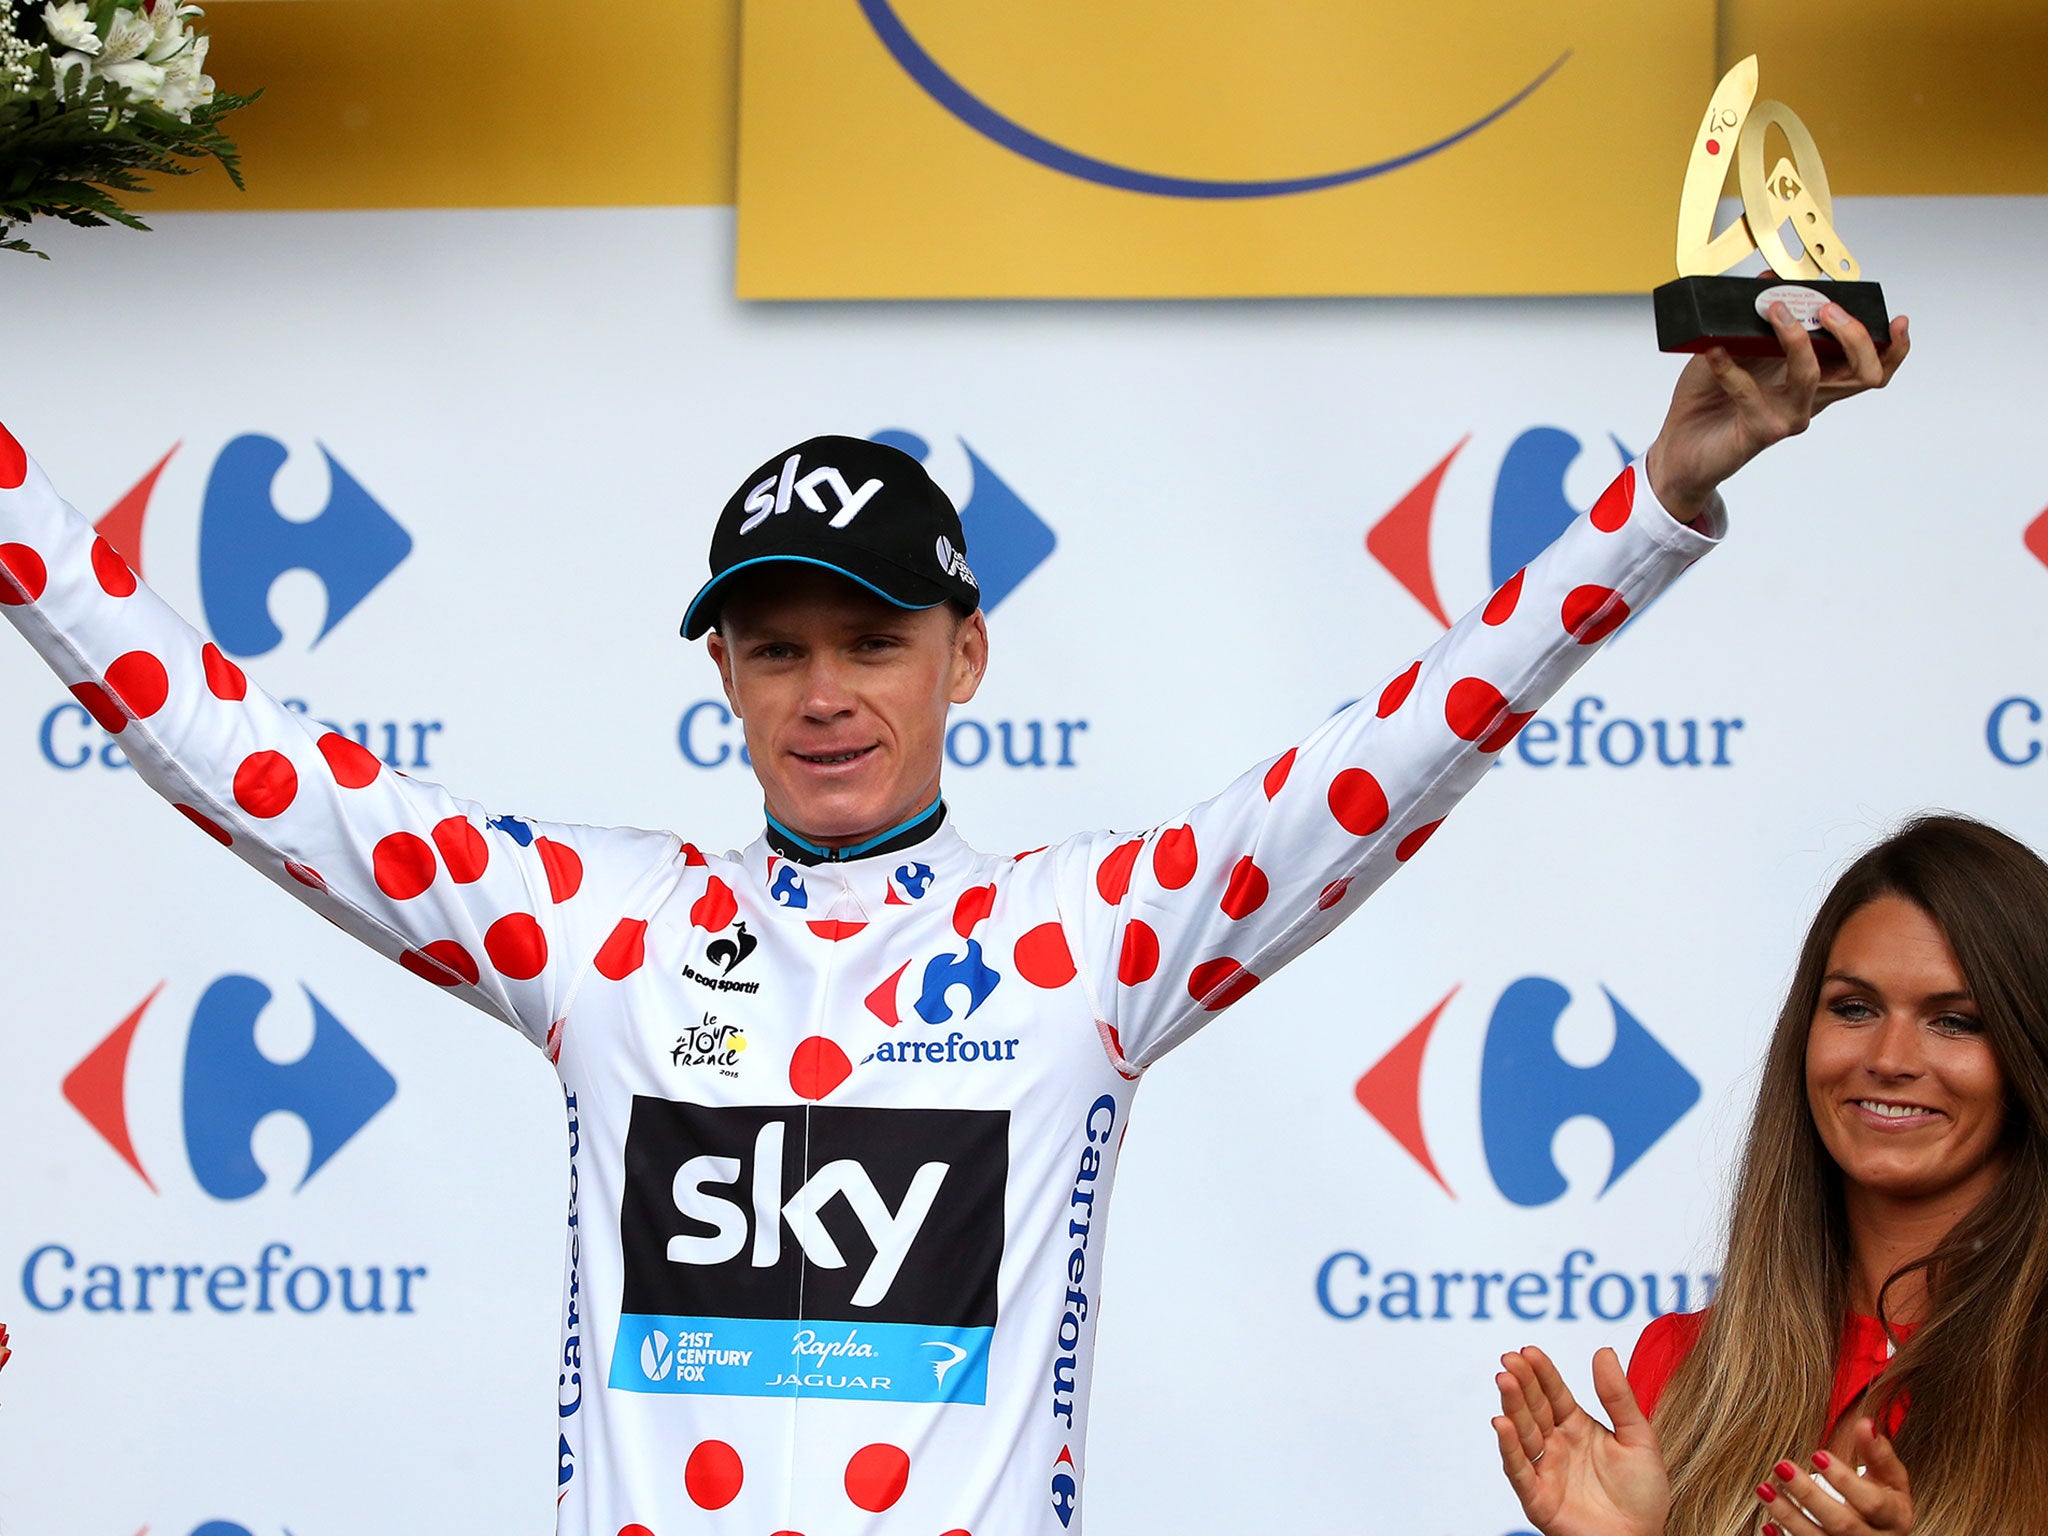 Geraint Thomas has offered superb support to Chris Froome and could finish on the podium in Paris